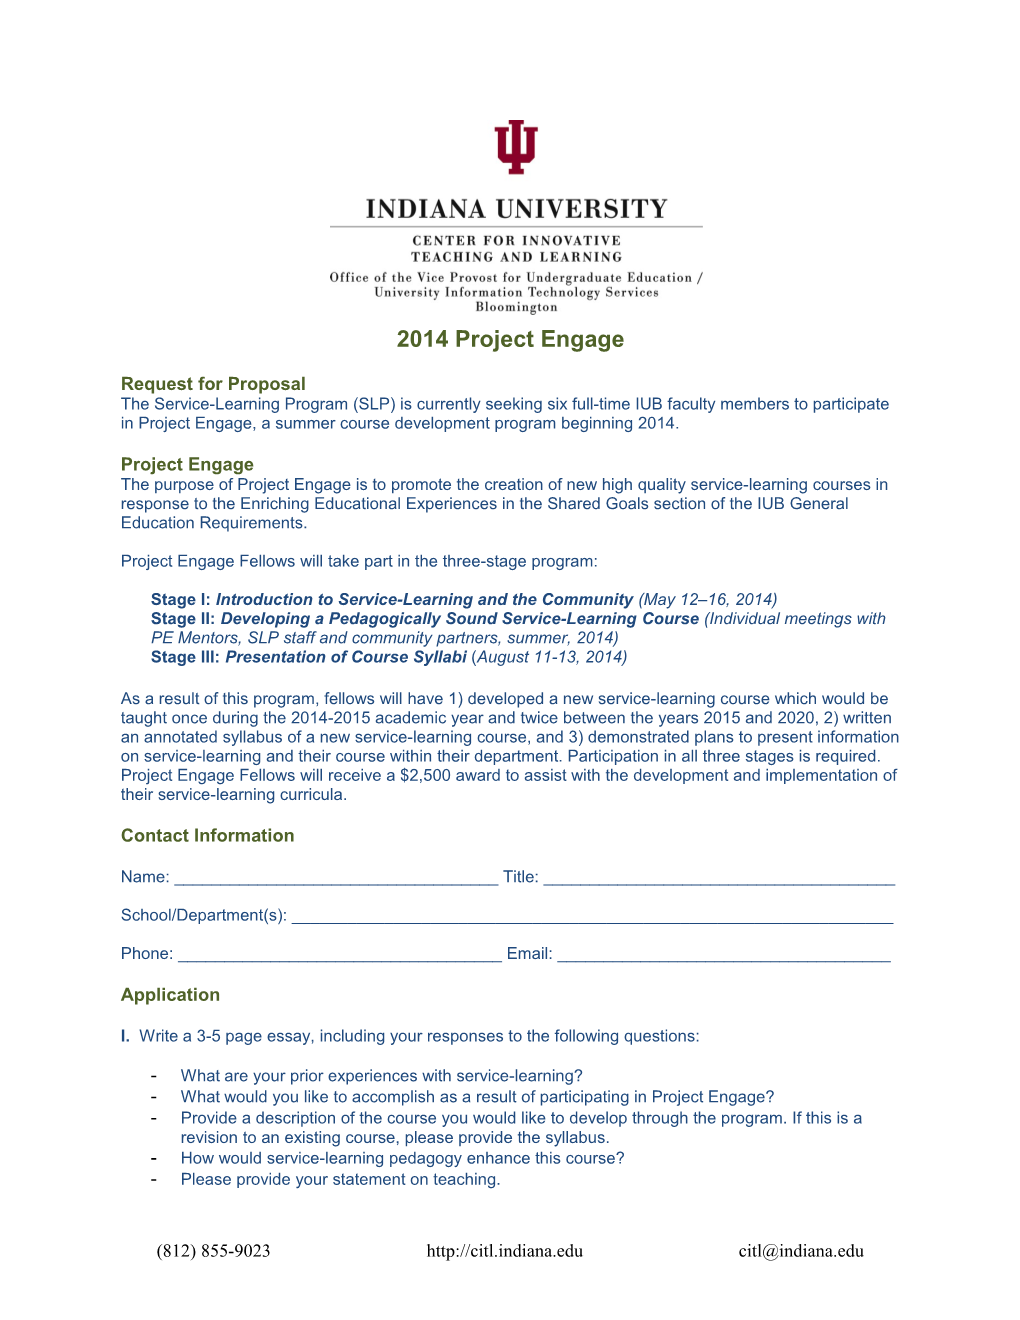 2014 Project Engage